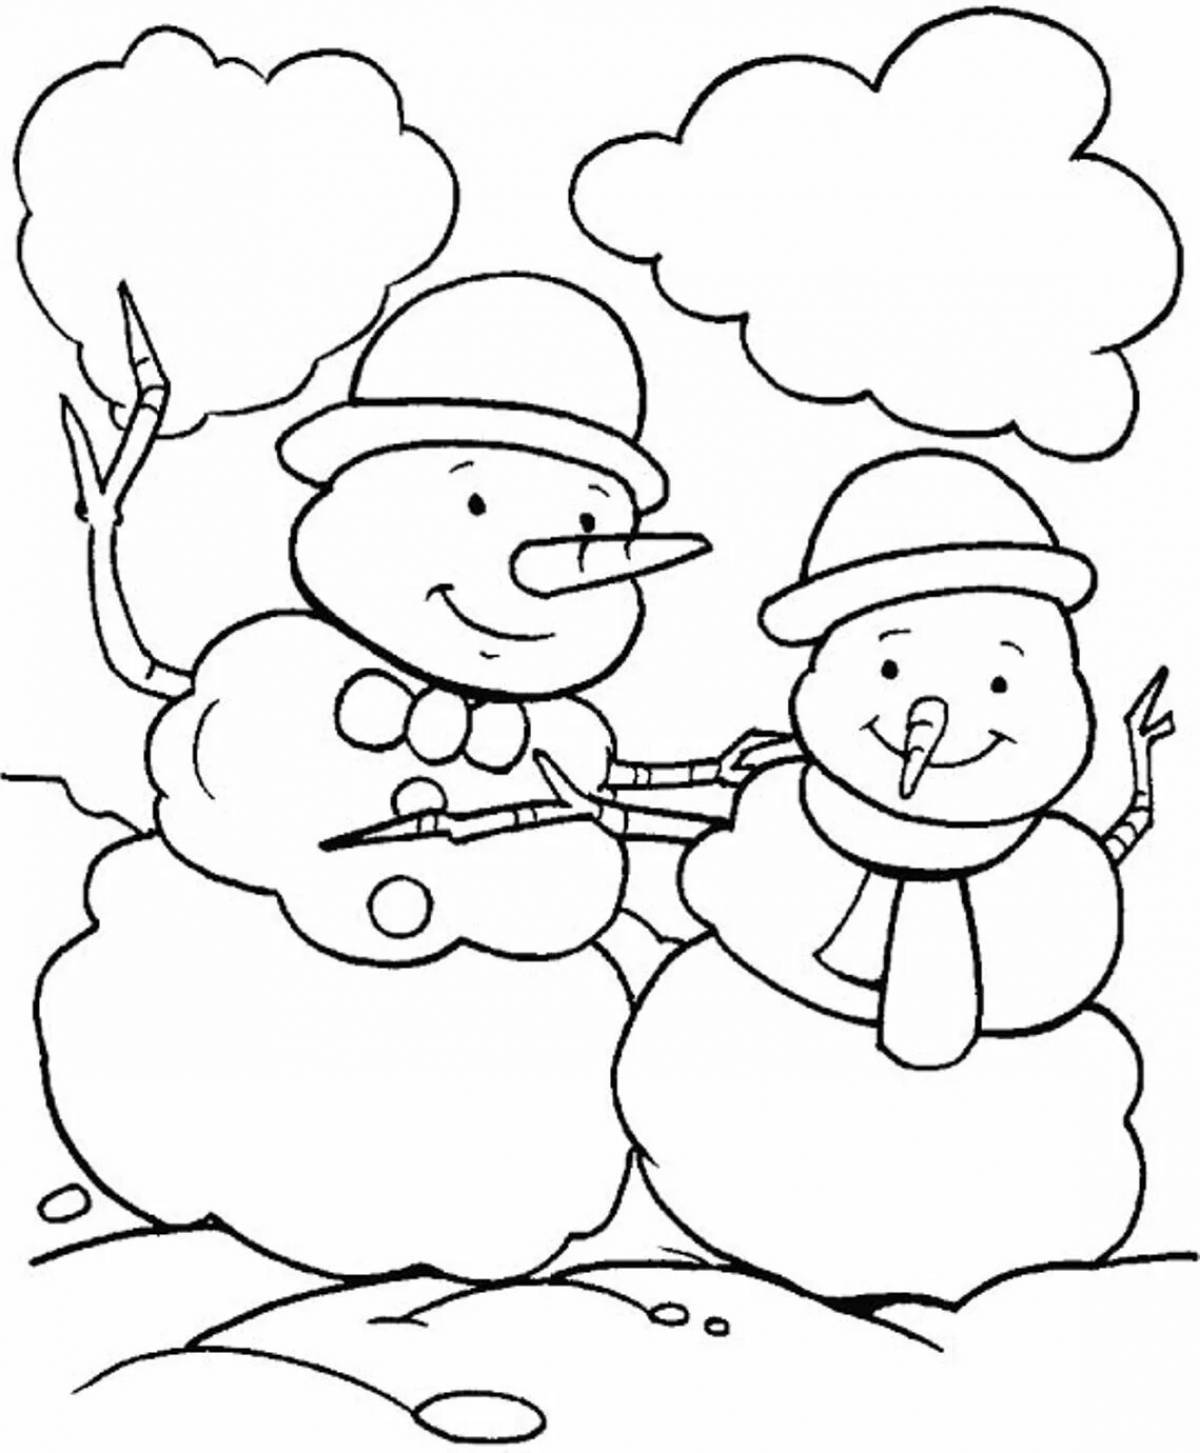 Live winter coloring book for kids